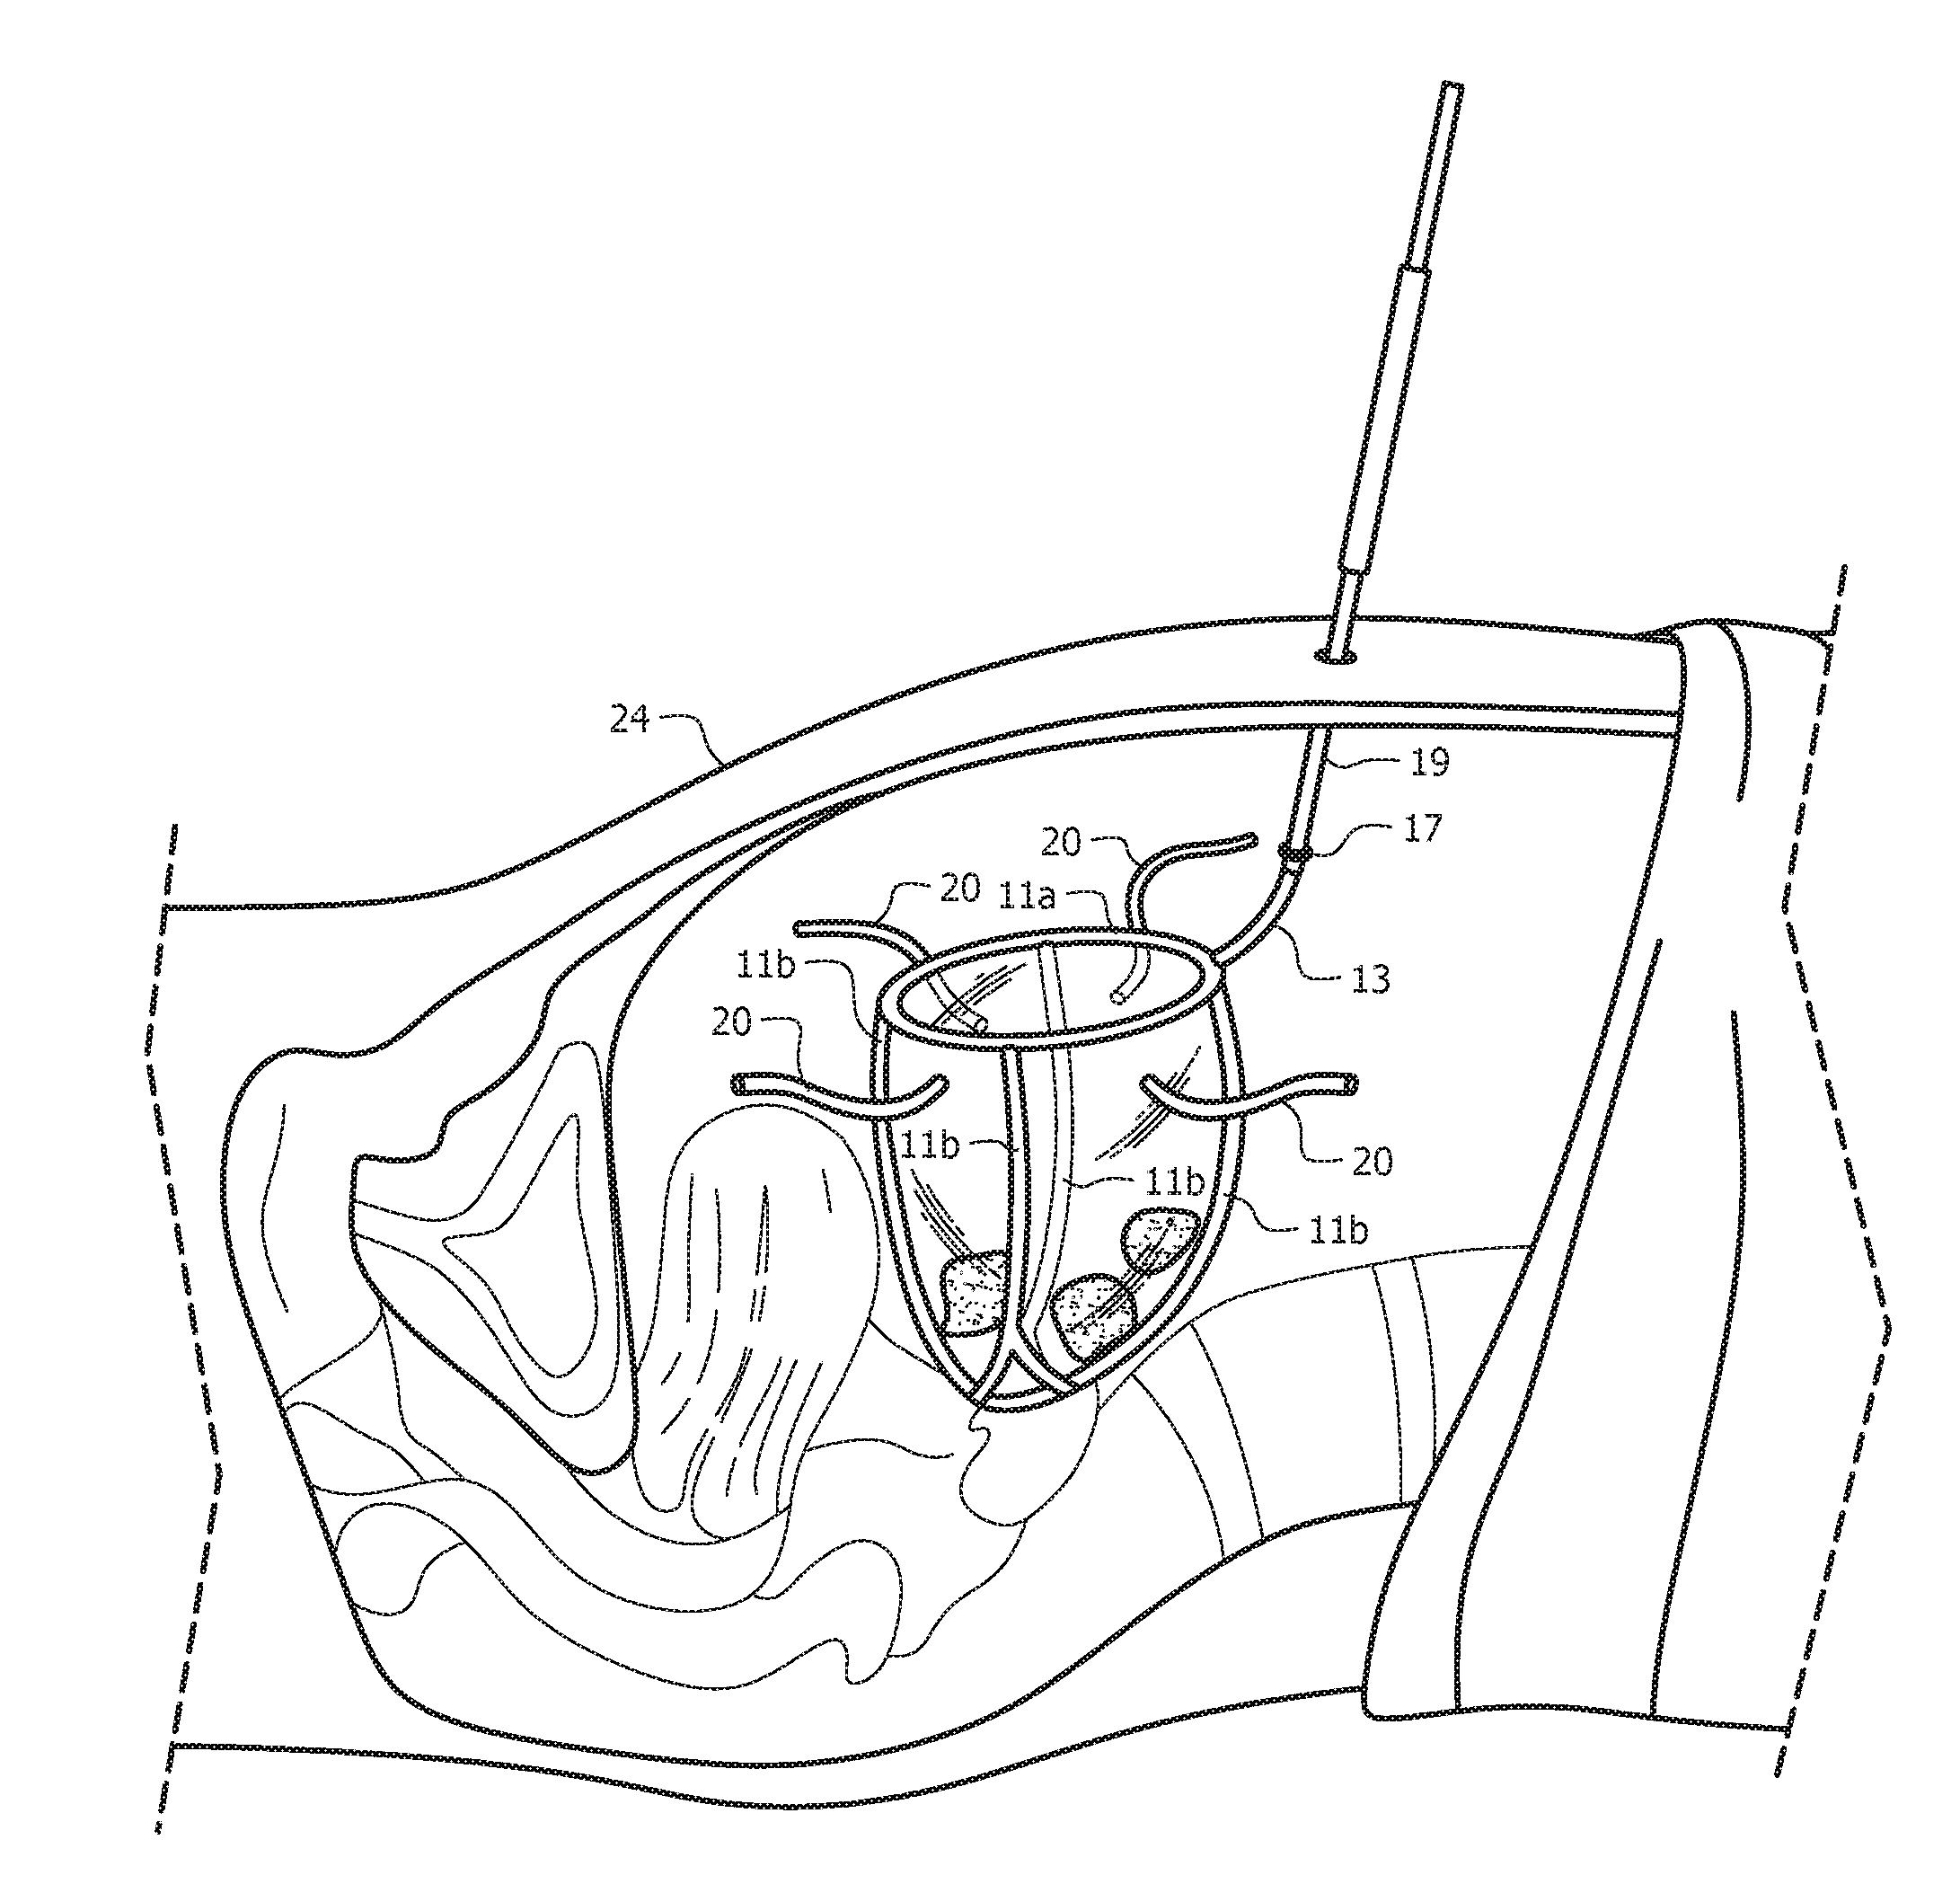 Pneumatic system and method for intermittently rigidifying an endoscopic specimen retaining carrier